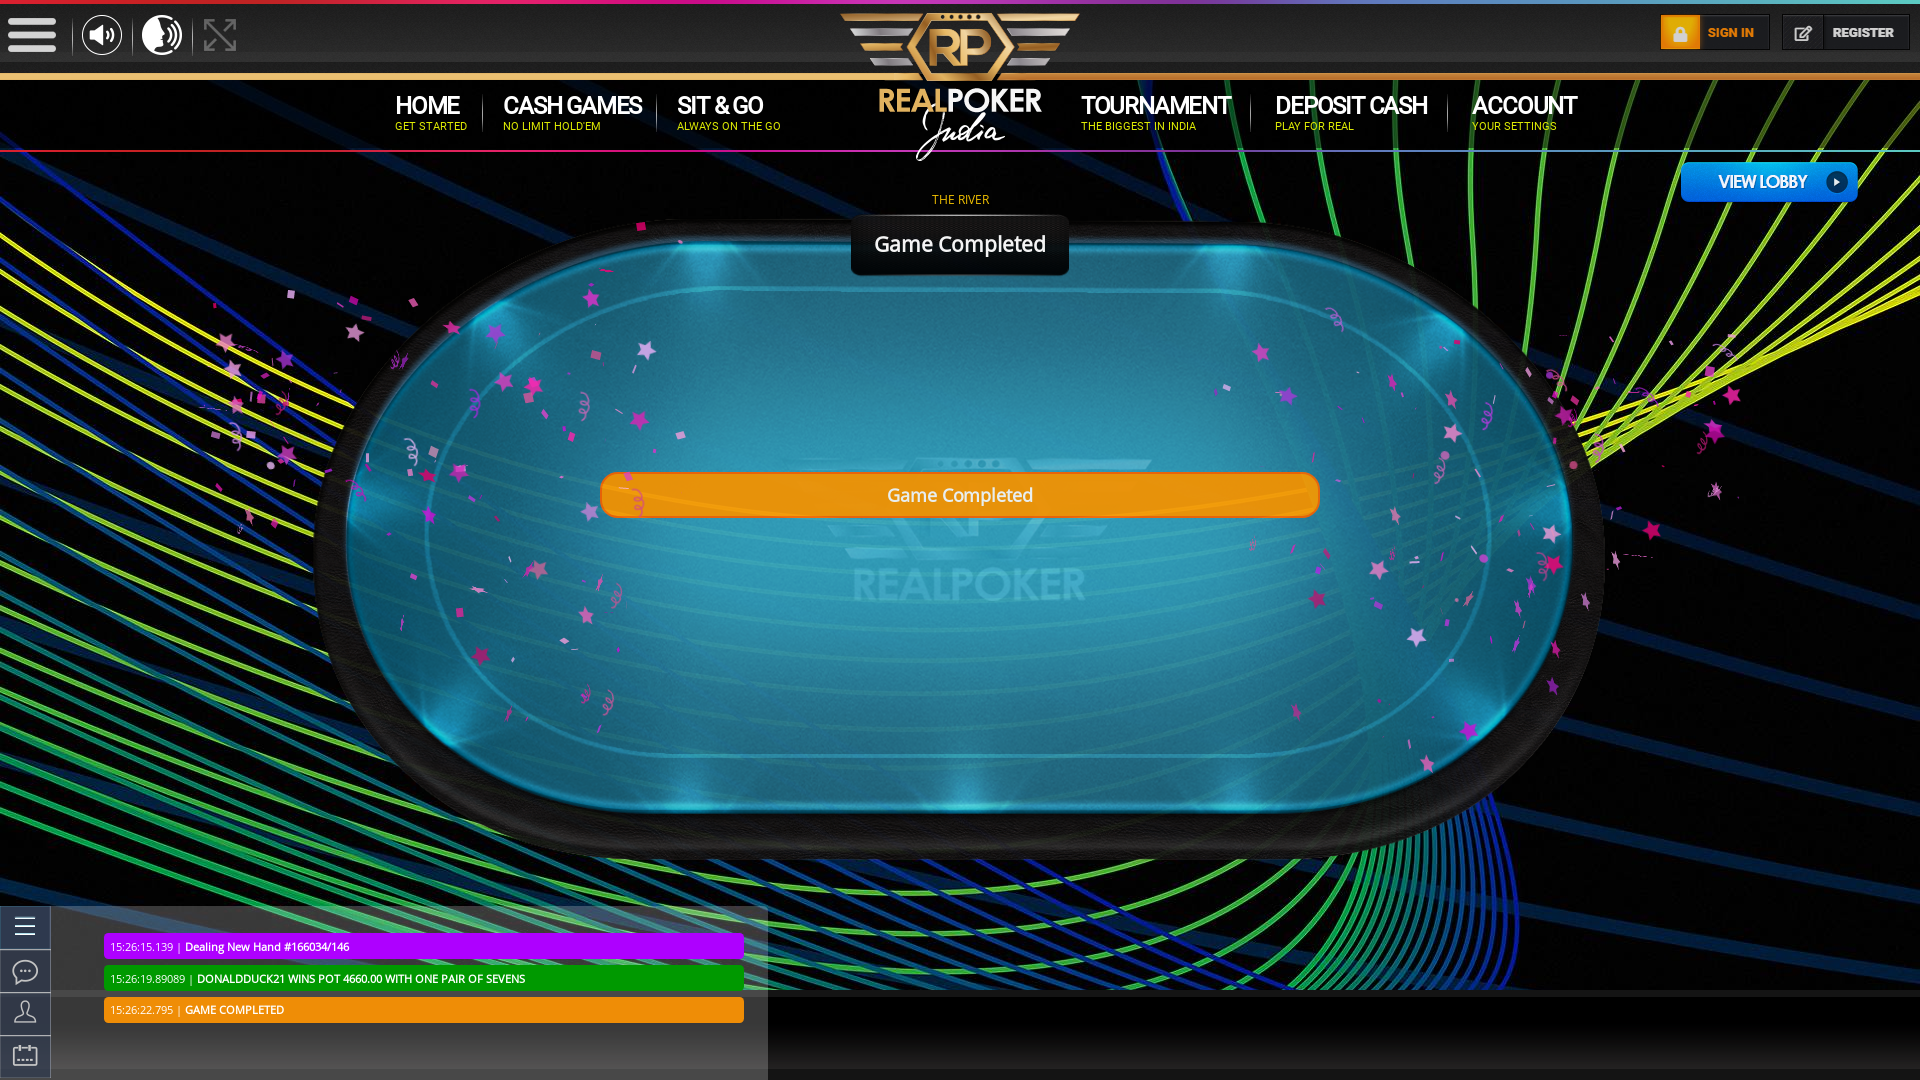 Indian online poker on a 10 player table in the 67th minute match up